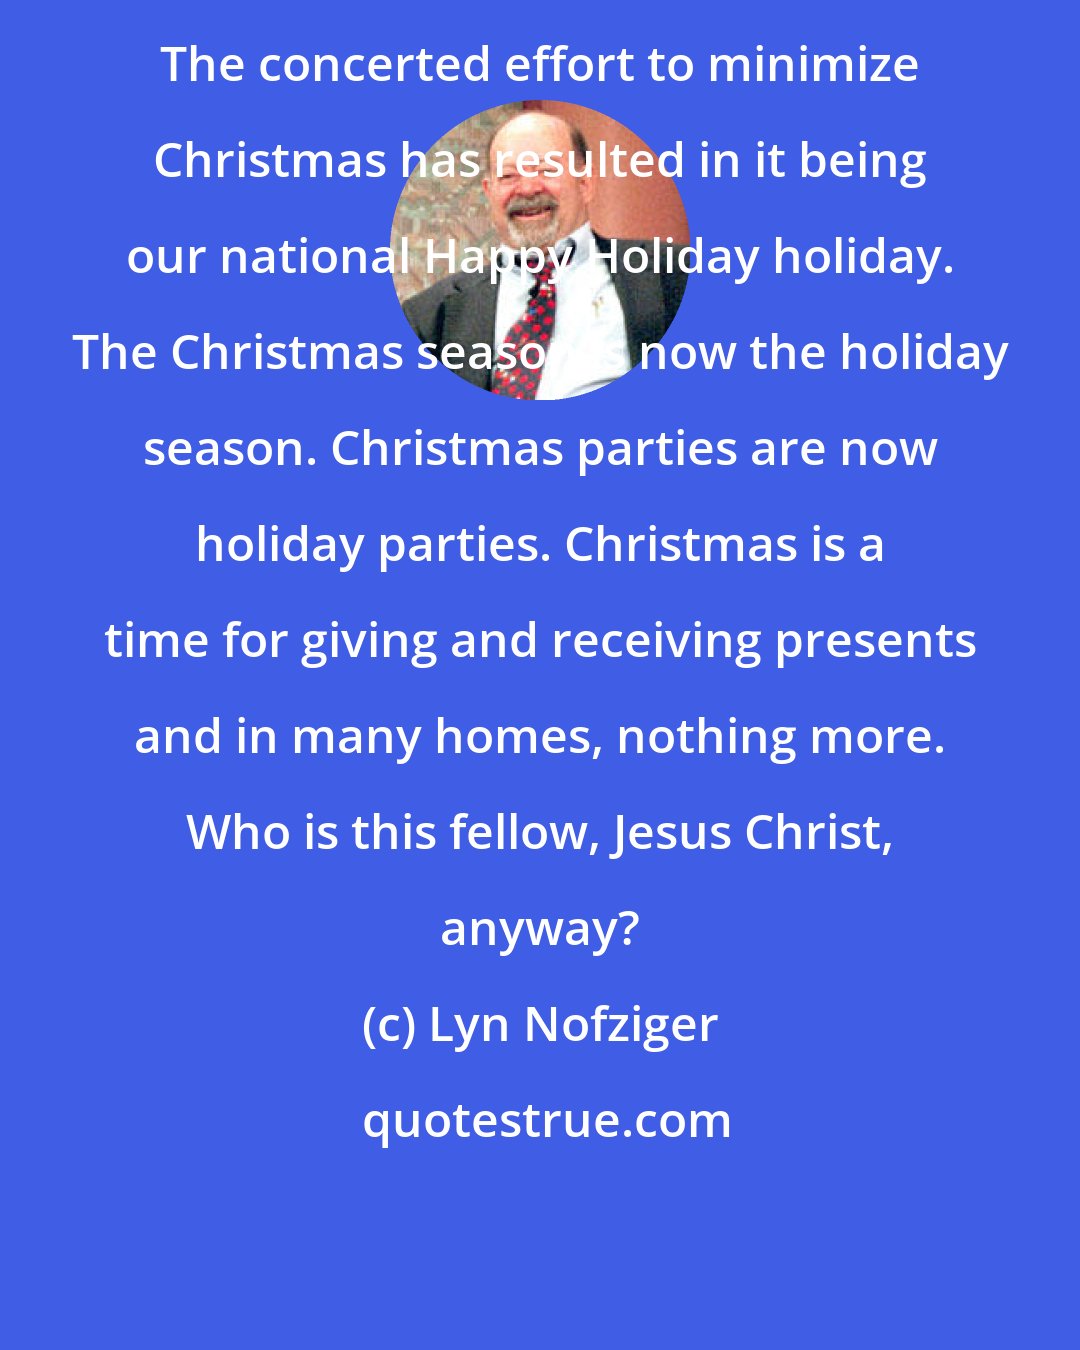 Lyn Nofziger: The concerted effort to minimize Christmas has resulted in it being our national Happy Holiday holiday. The Christmas season is now the holiday season. Christmas parties are now holiday parties. Christmas is a time for giving and receiving presents and in many homes, nothing more. Who is this fellow, Jesus Christ, anyway?